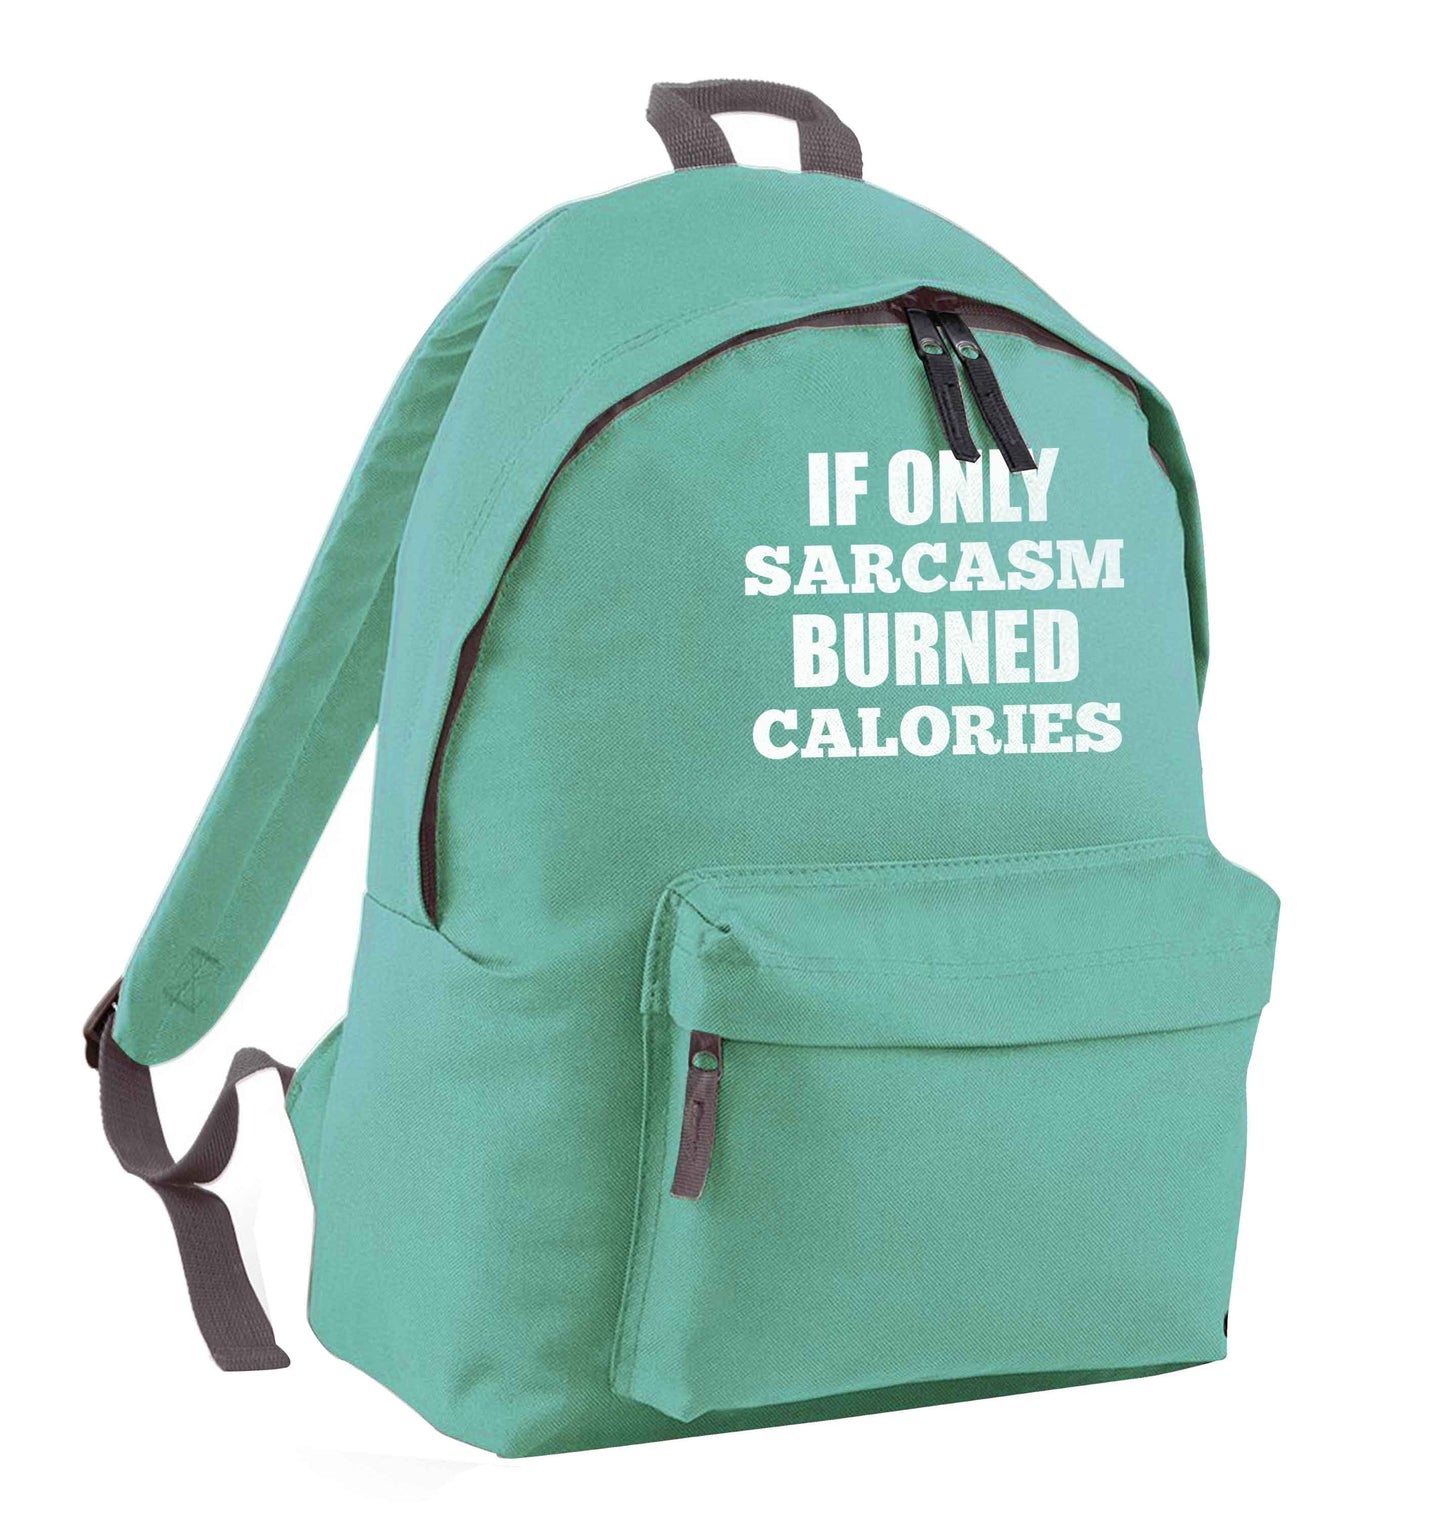 If only sarcasm burned calories mint adults backpack